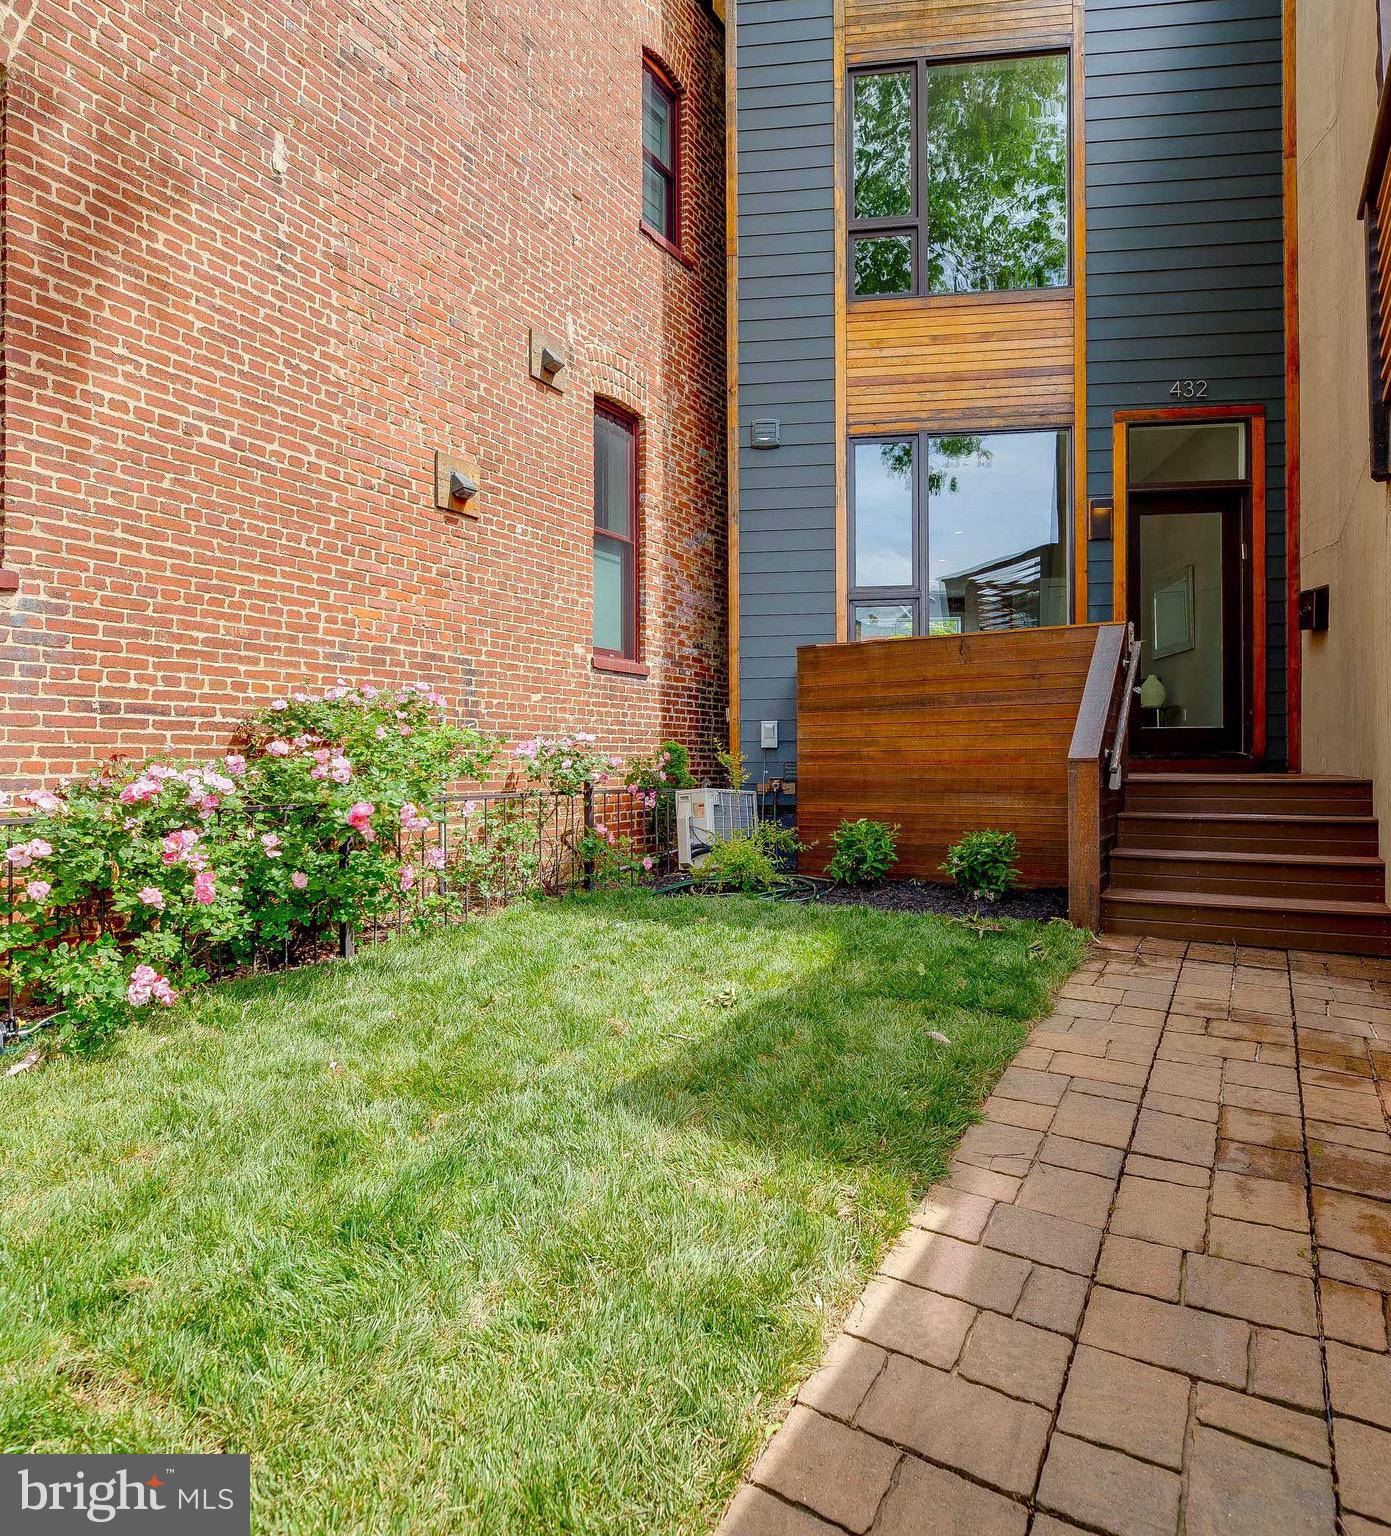 a view of a backyard with plants and brick walls